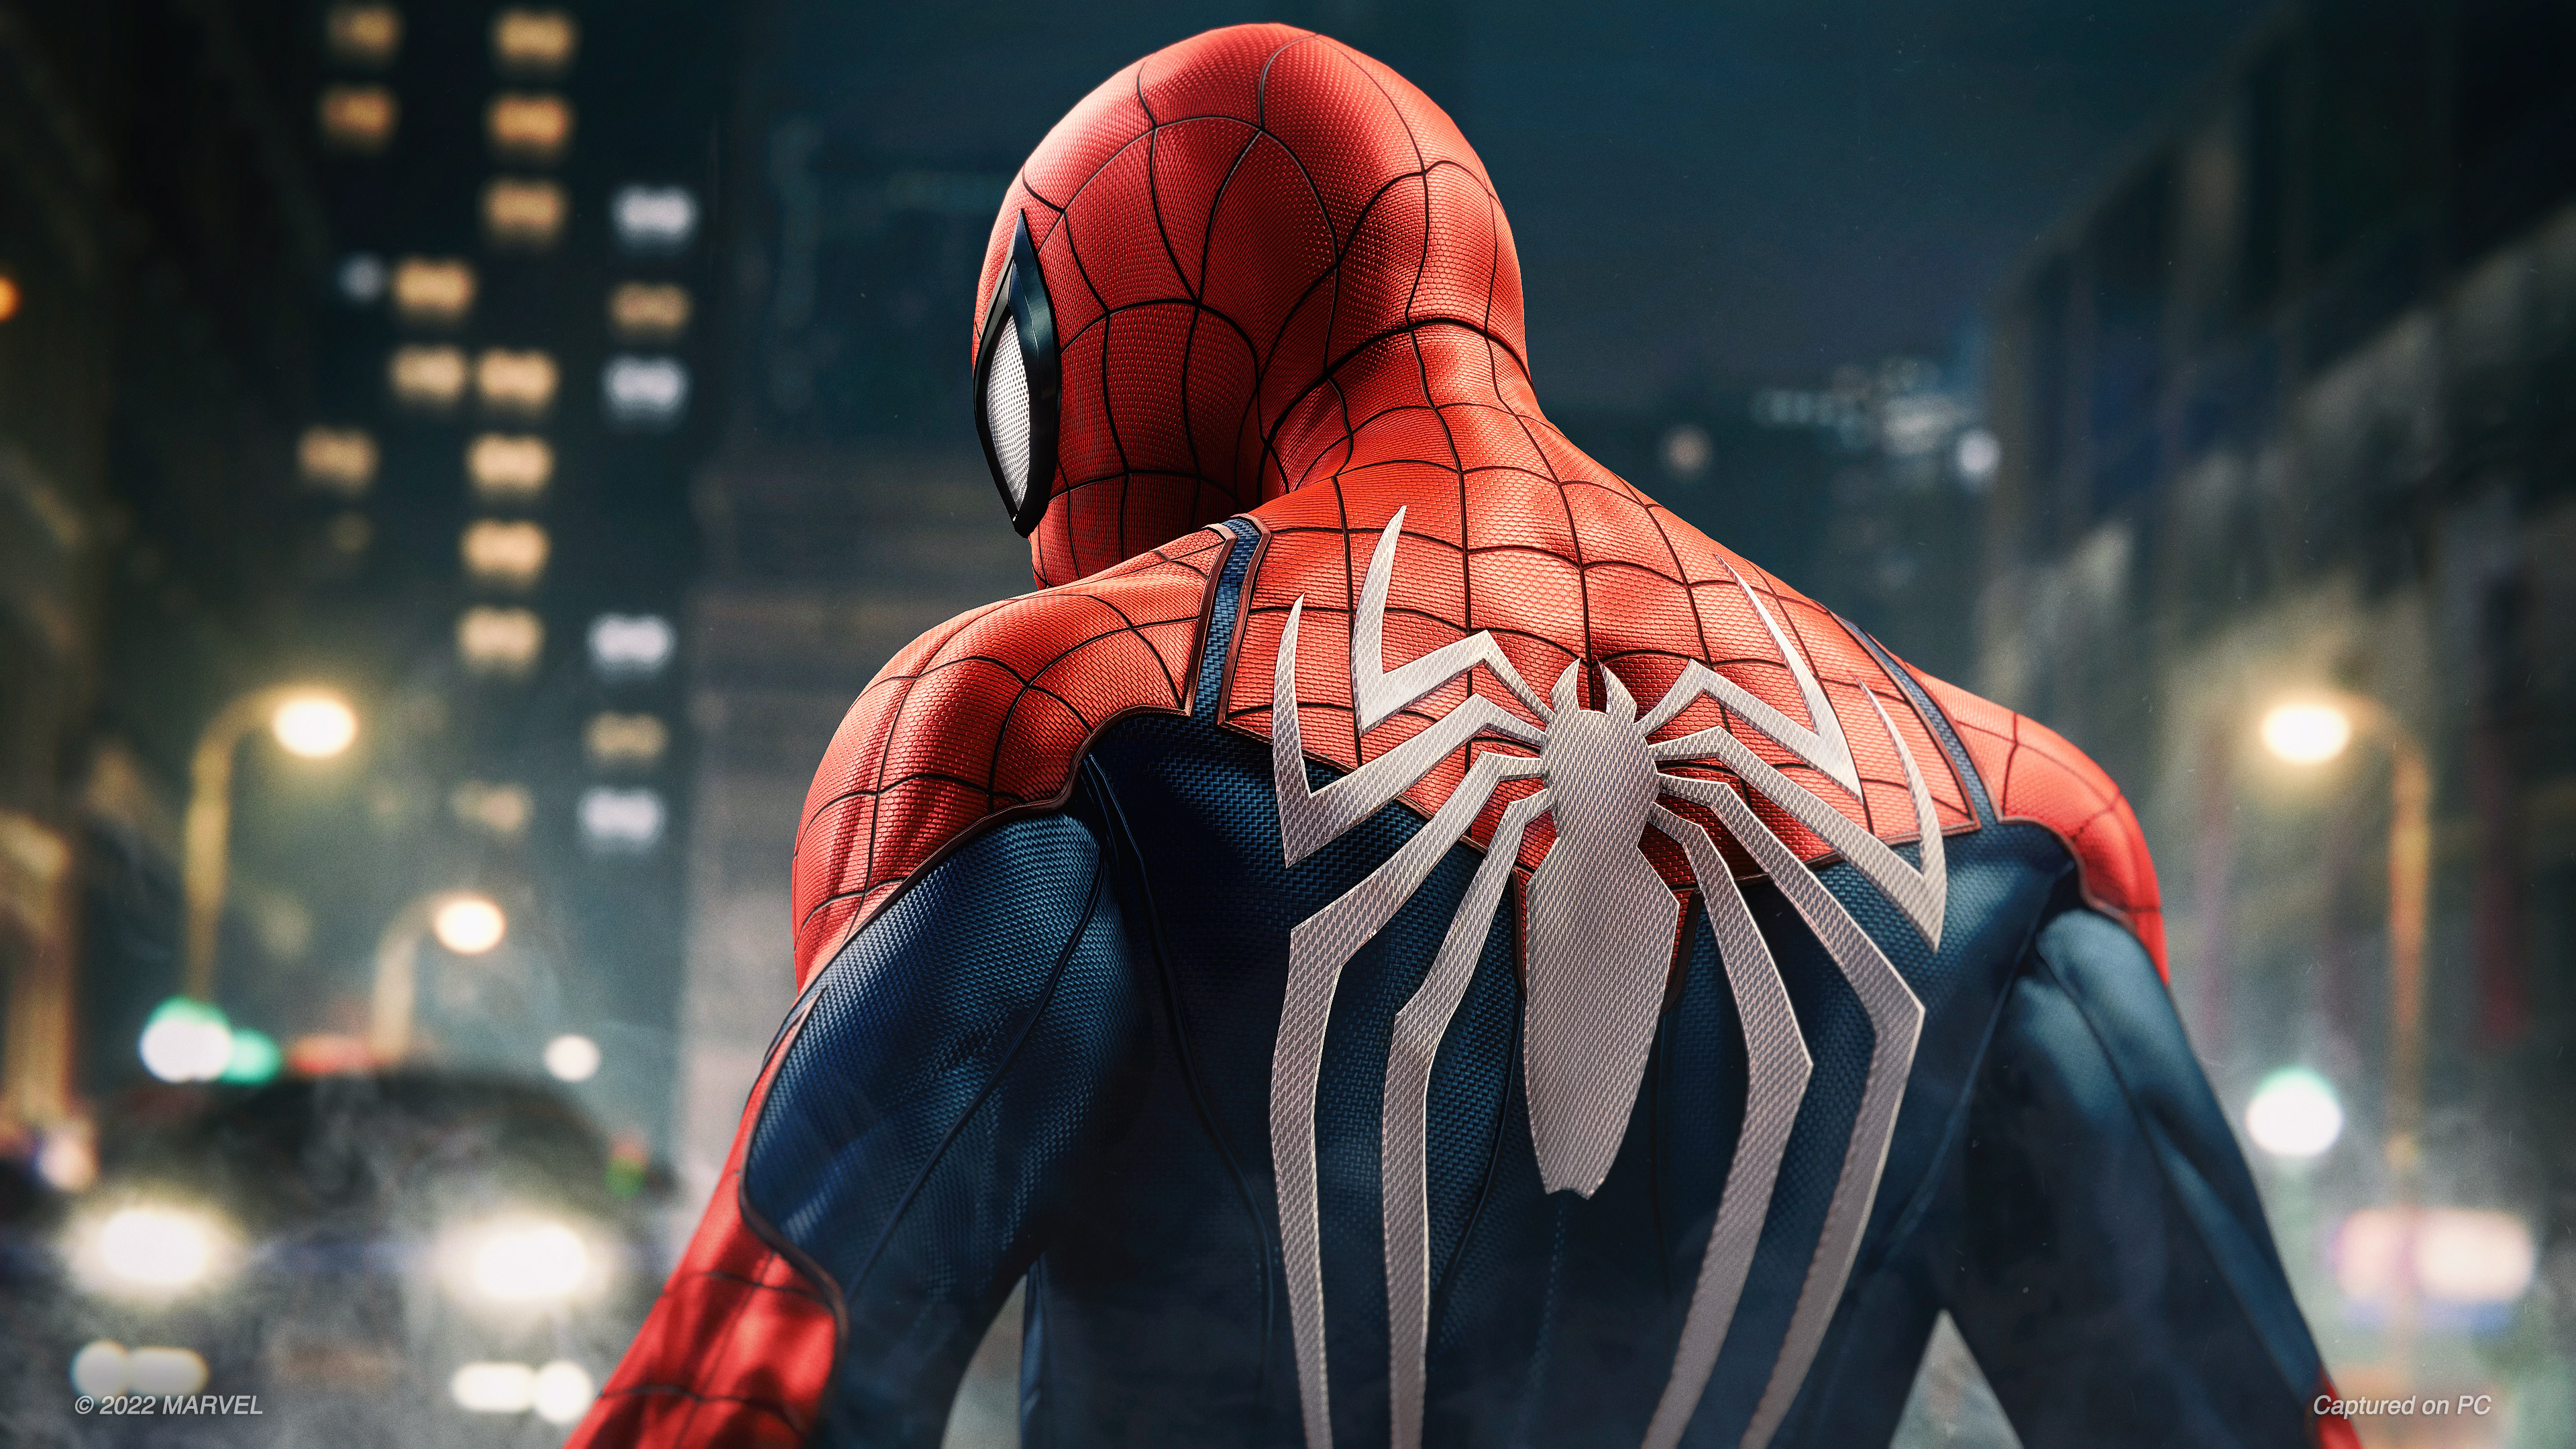 Spider-Man Remastered PC Features Ray Tracing and DLSS